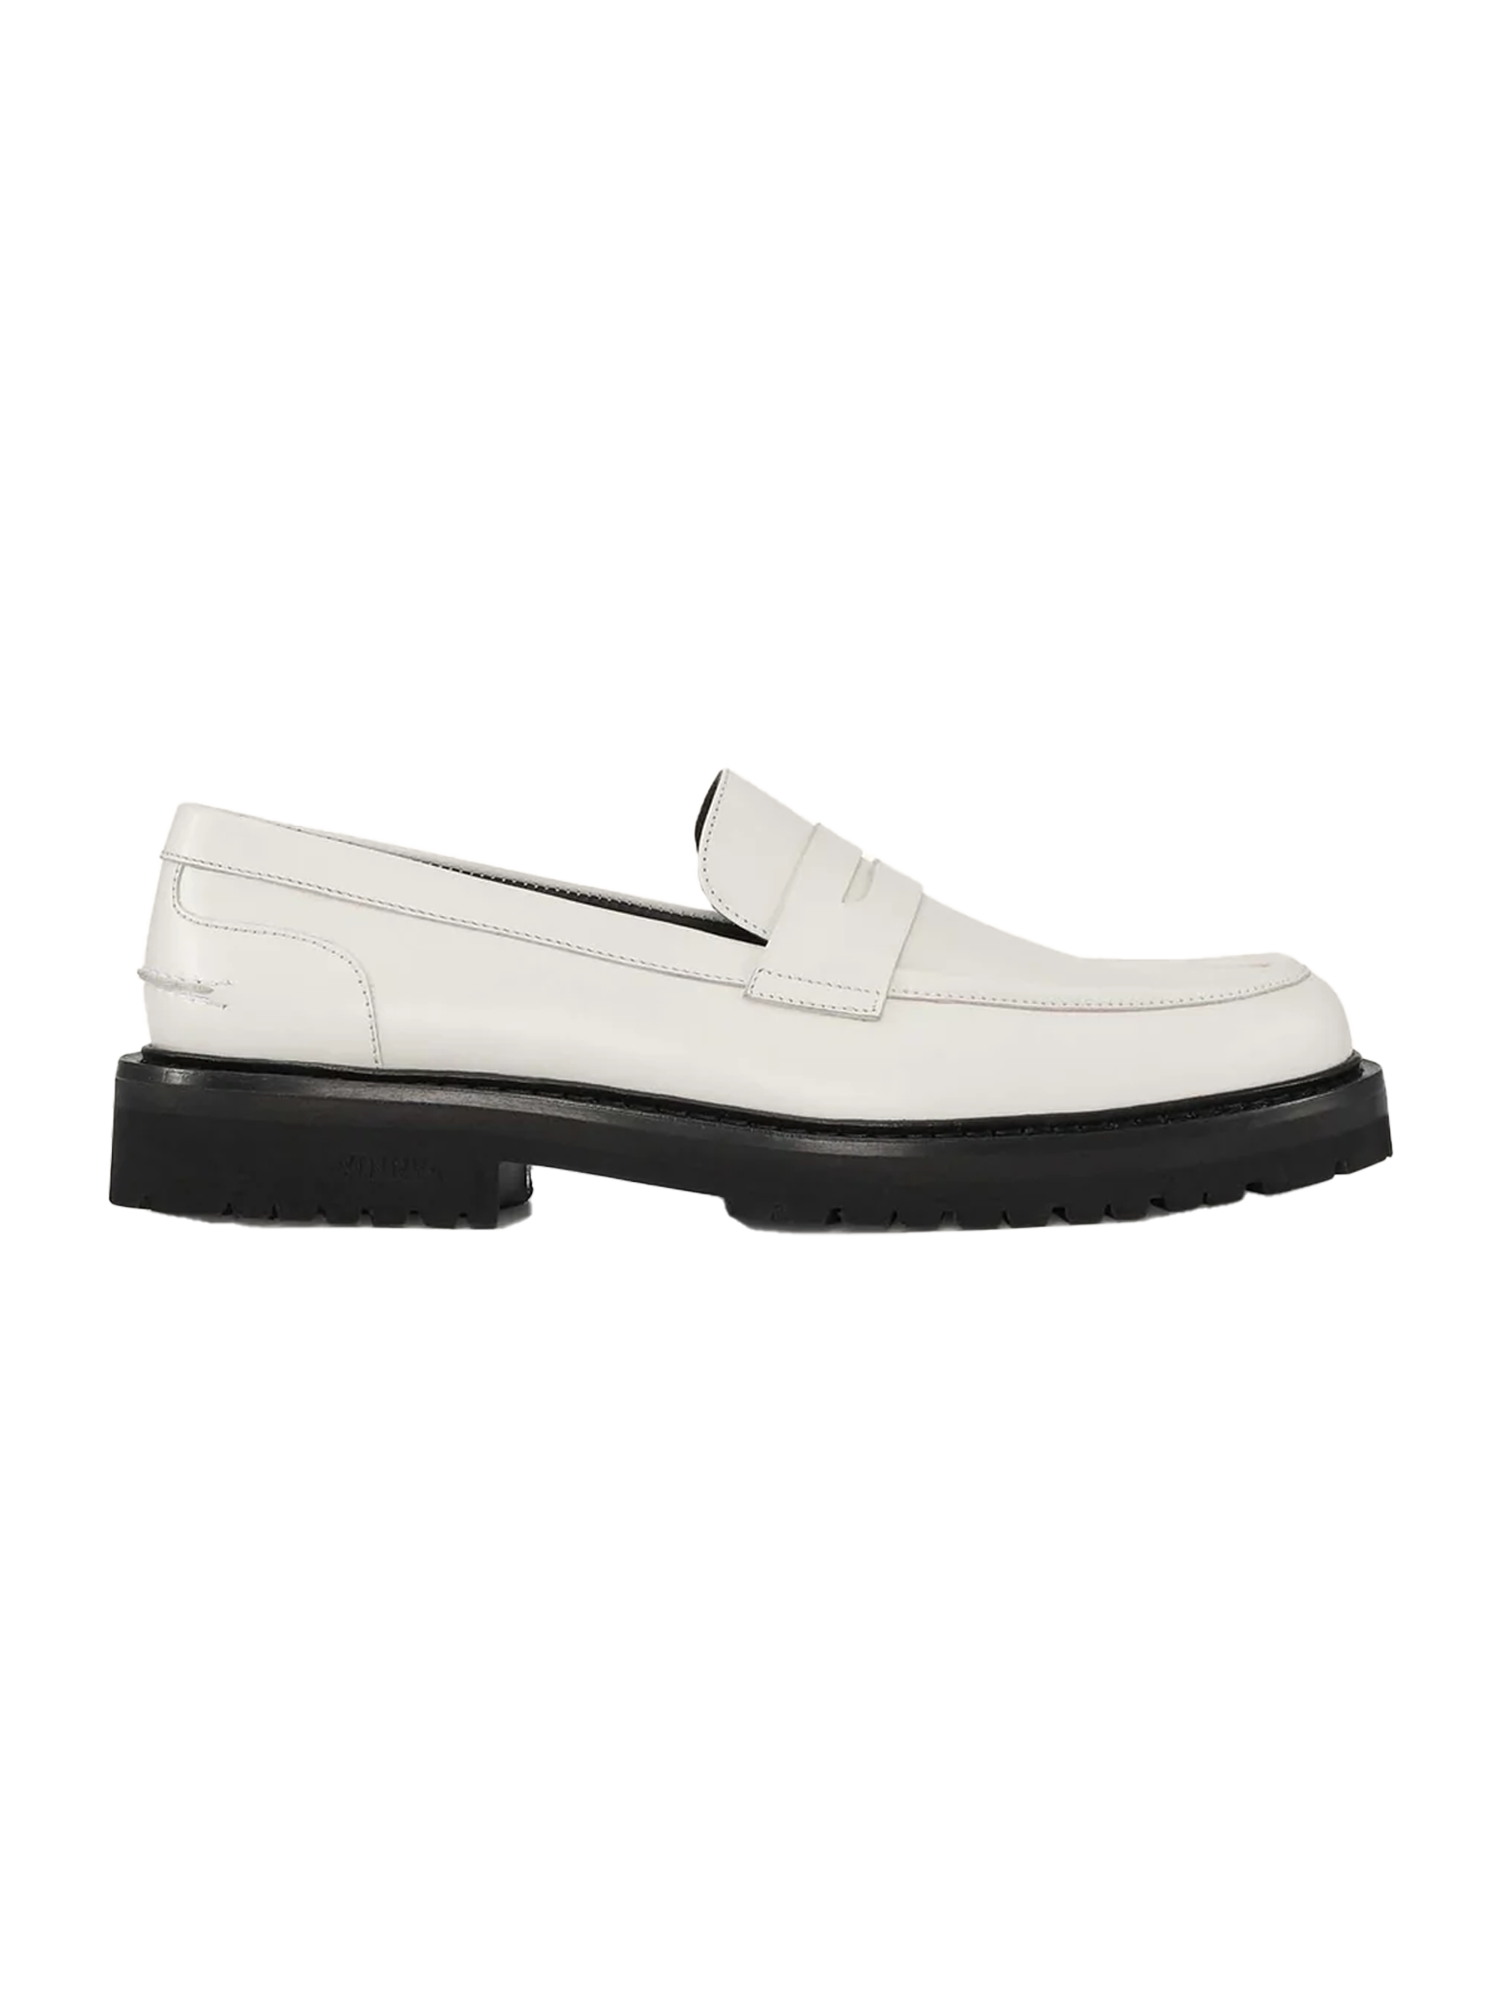 Vinny's The Vibe - Footwear - Richee - Penny Loafer - Off White